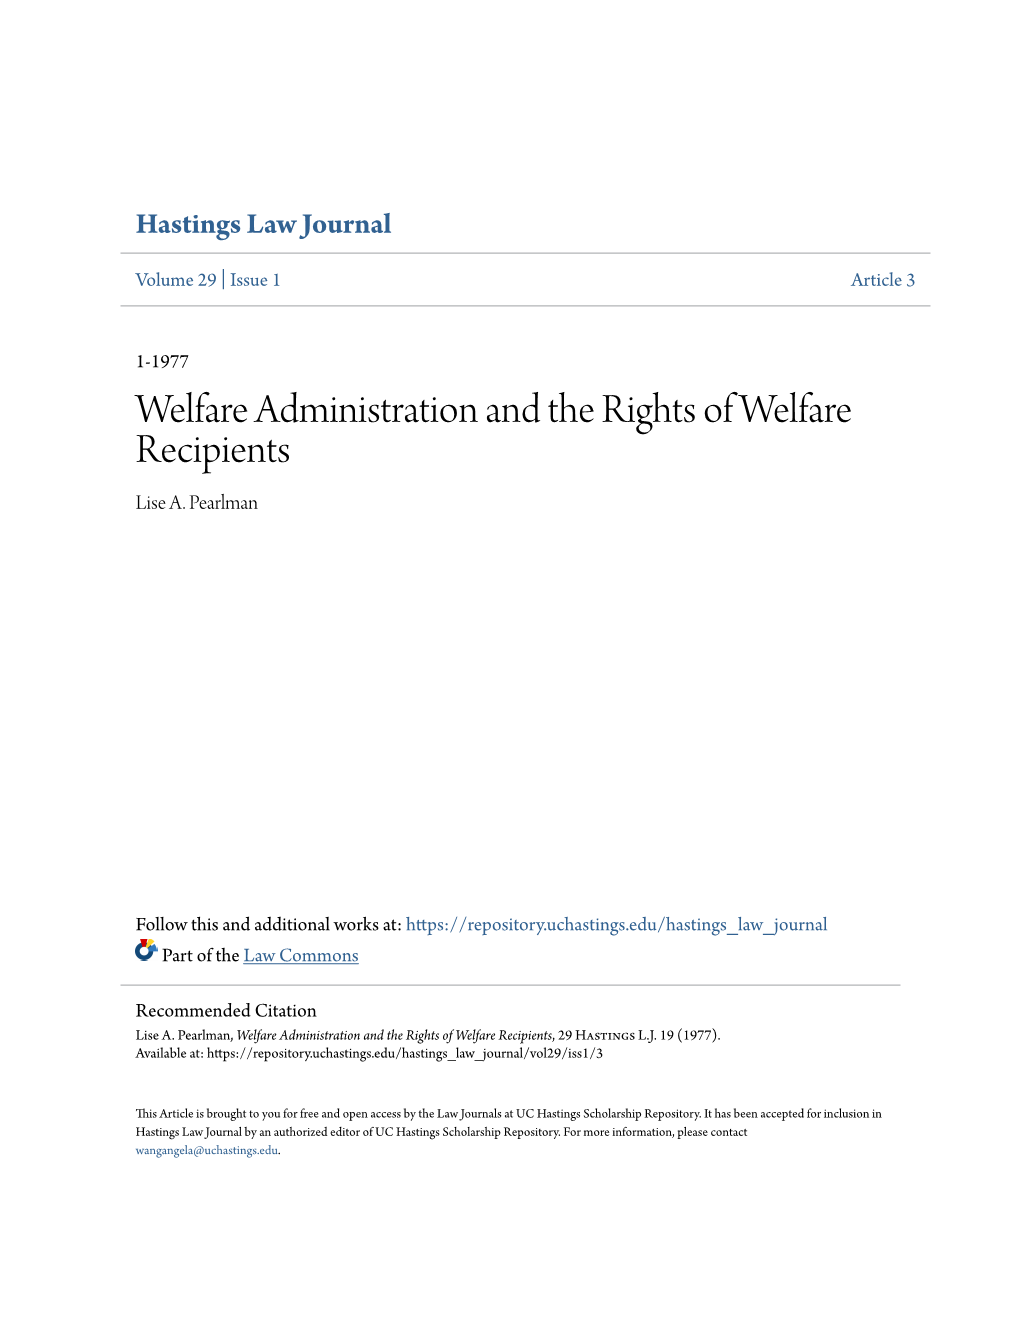 Welfare Administration and the Rights of Welfare Recipients Lise A